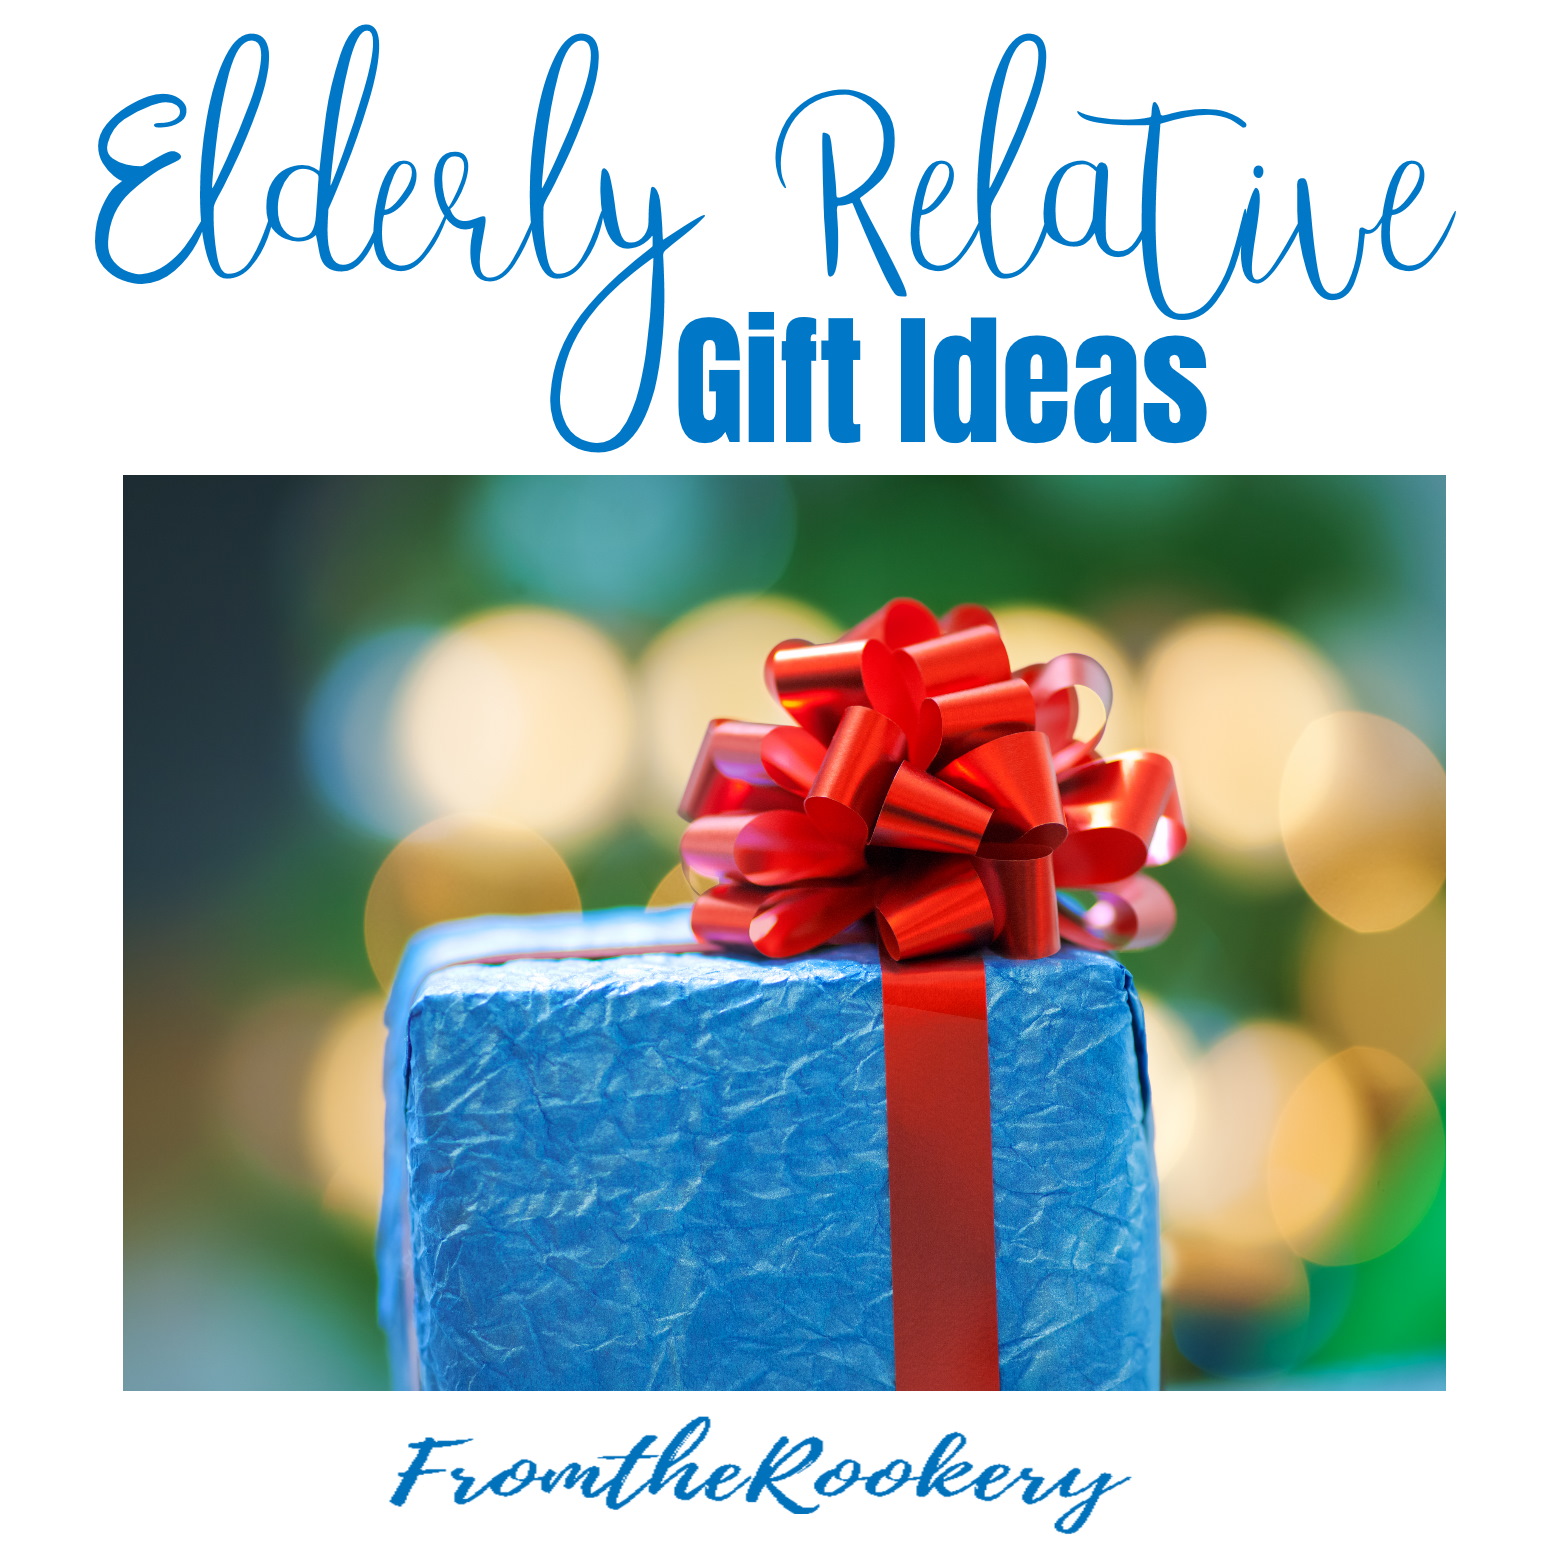 Best Gifts for Seniors: 25 Heartwarming Holiday Ideas - Coast Family Home  Care